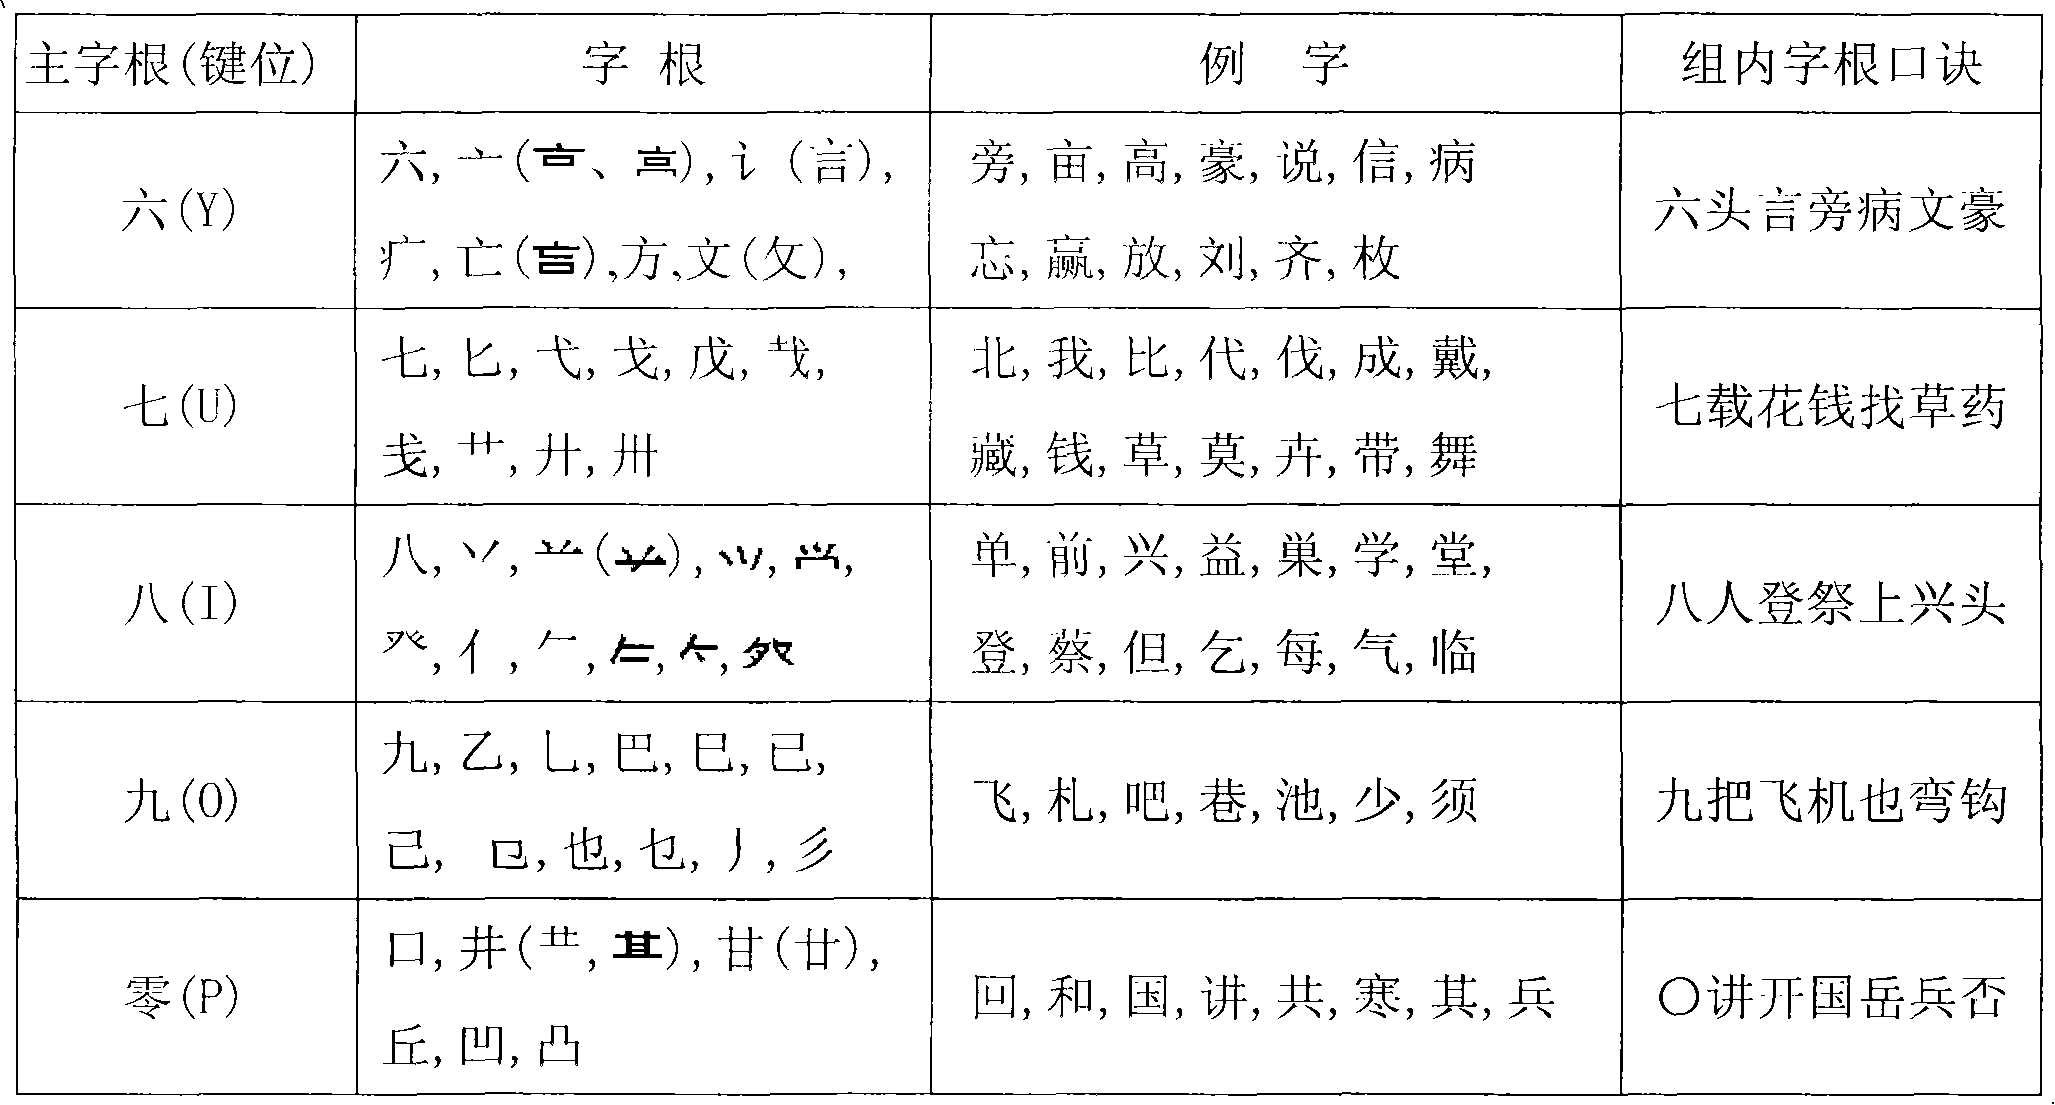 Chinese character computer input method for pictographic and ideographic classified radicals